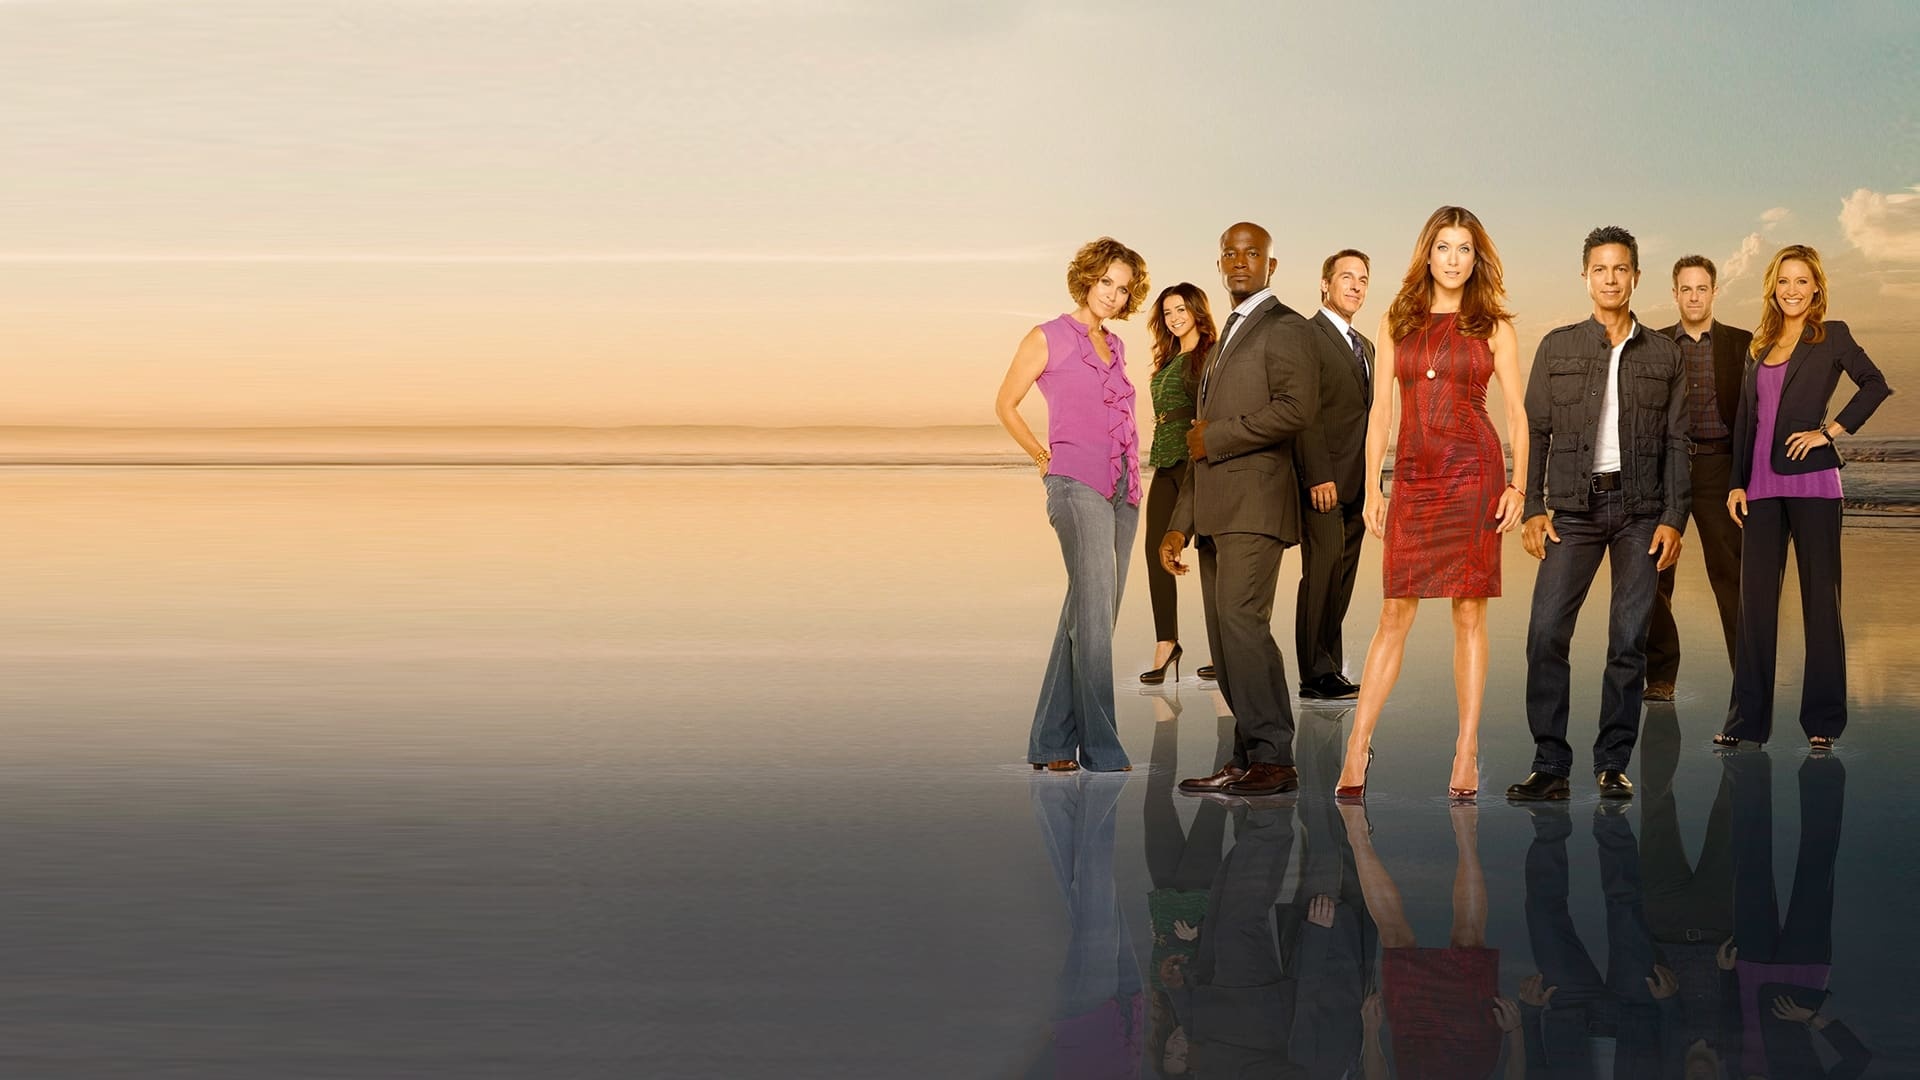 Private Practice, Backdrops, The movie database, Emotional series, 1920x1080 Full HD Desktop